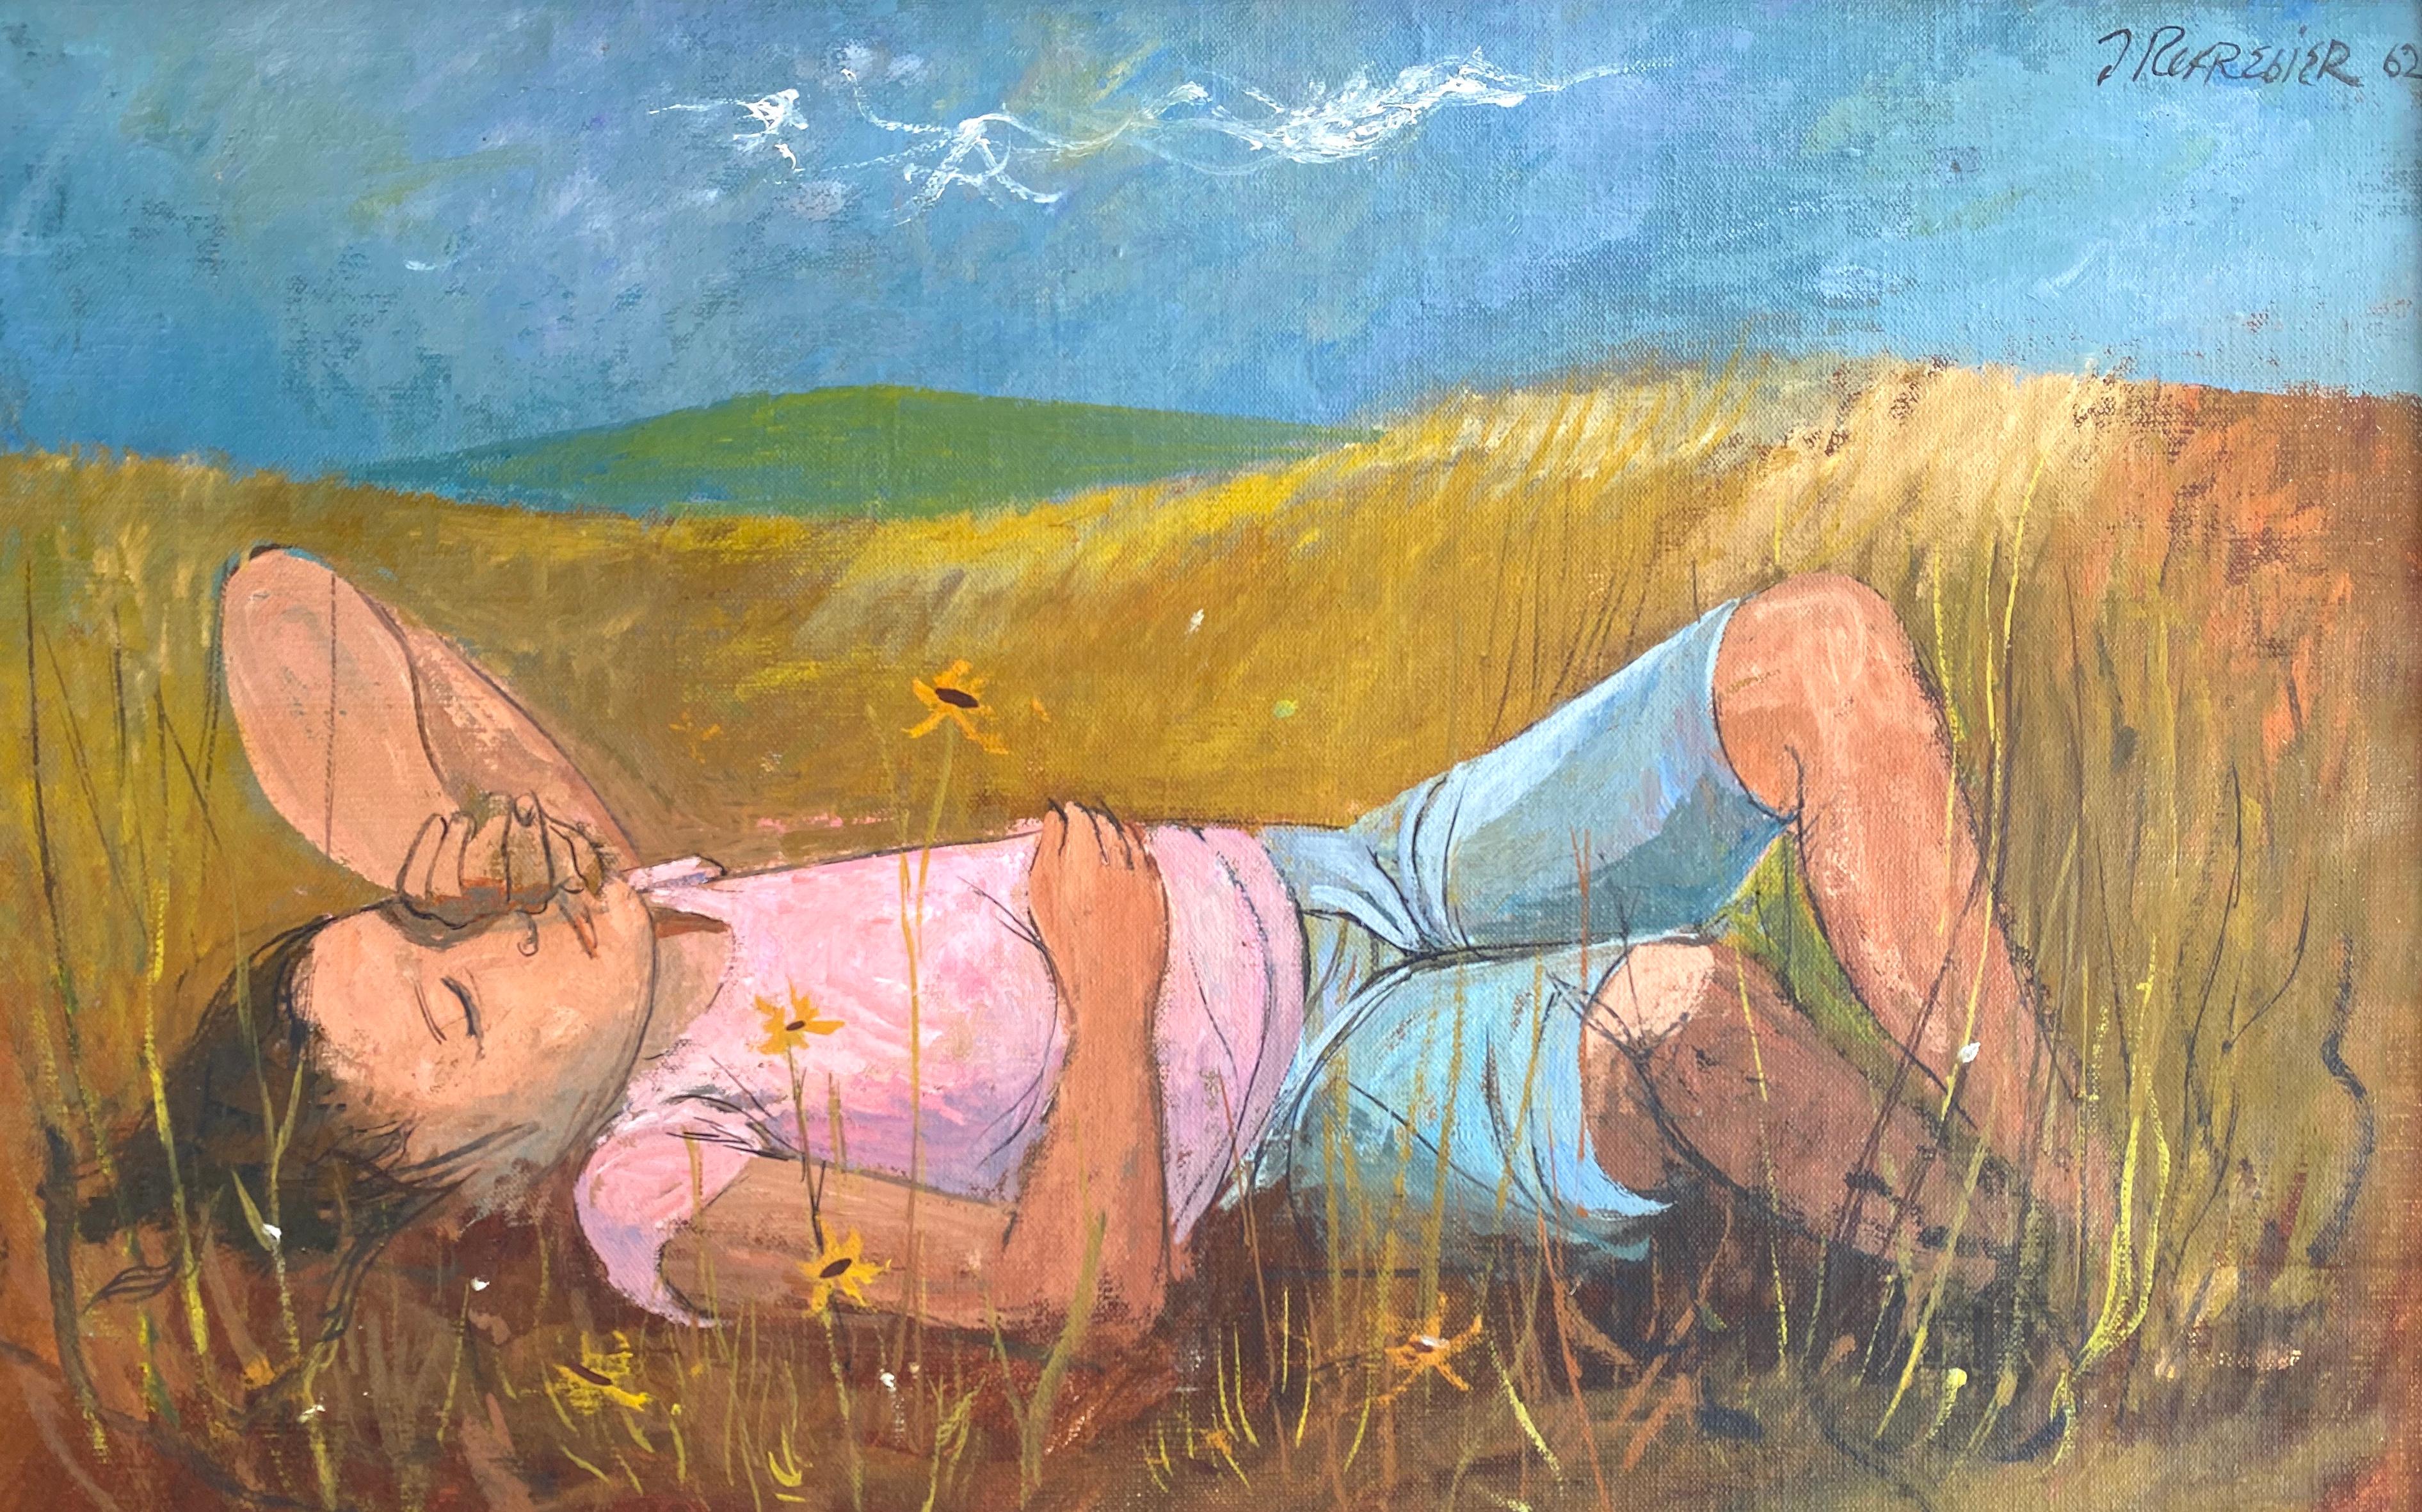 Anton Refregier Figurative Painting - “Girl in the Grass”